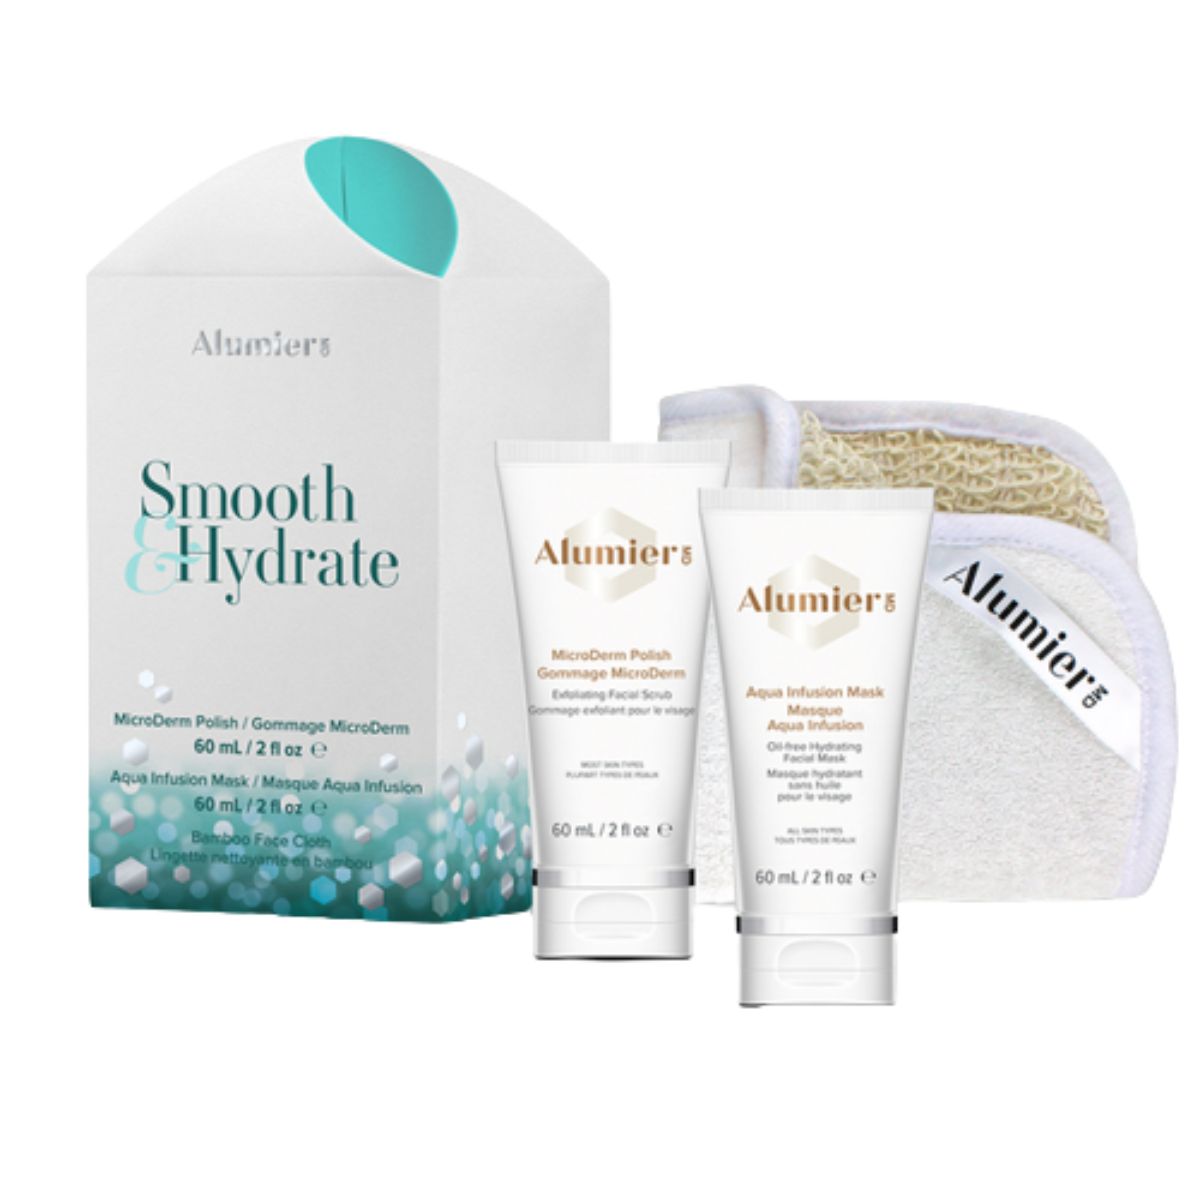 Alumier MD Smooth & Hydrate Kit.